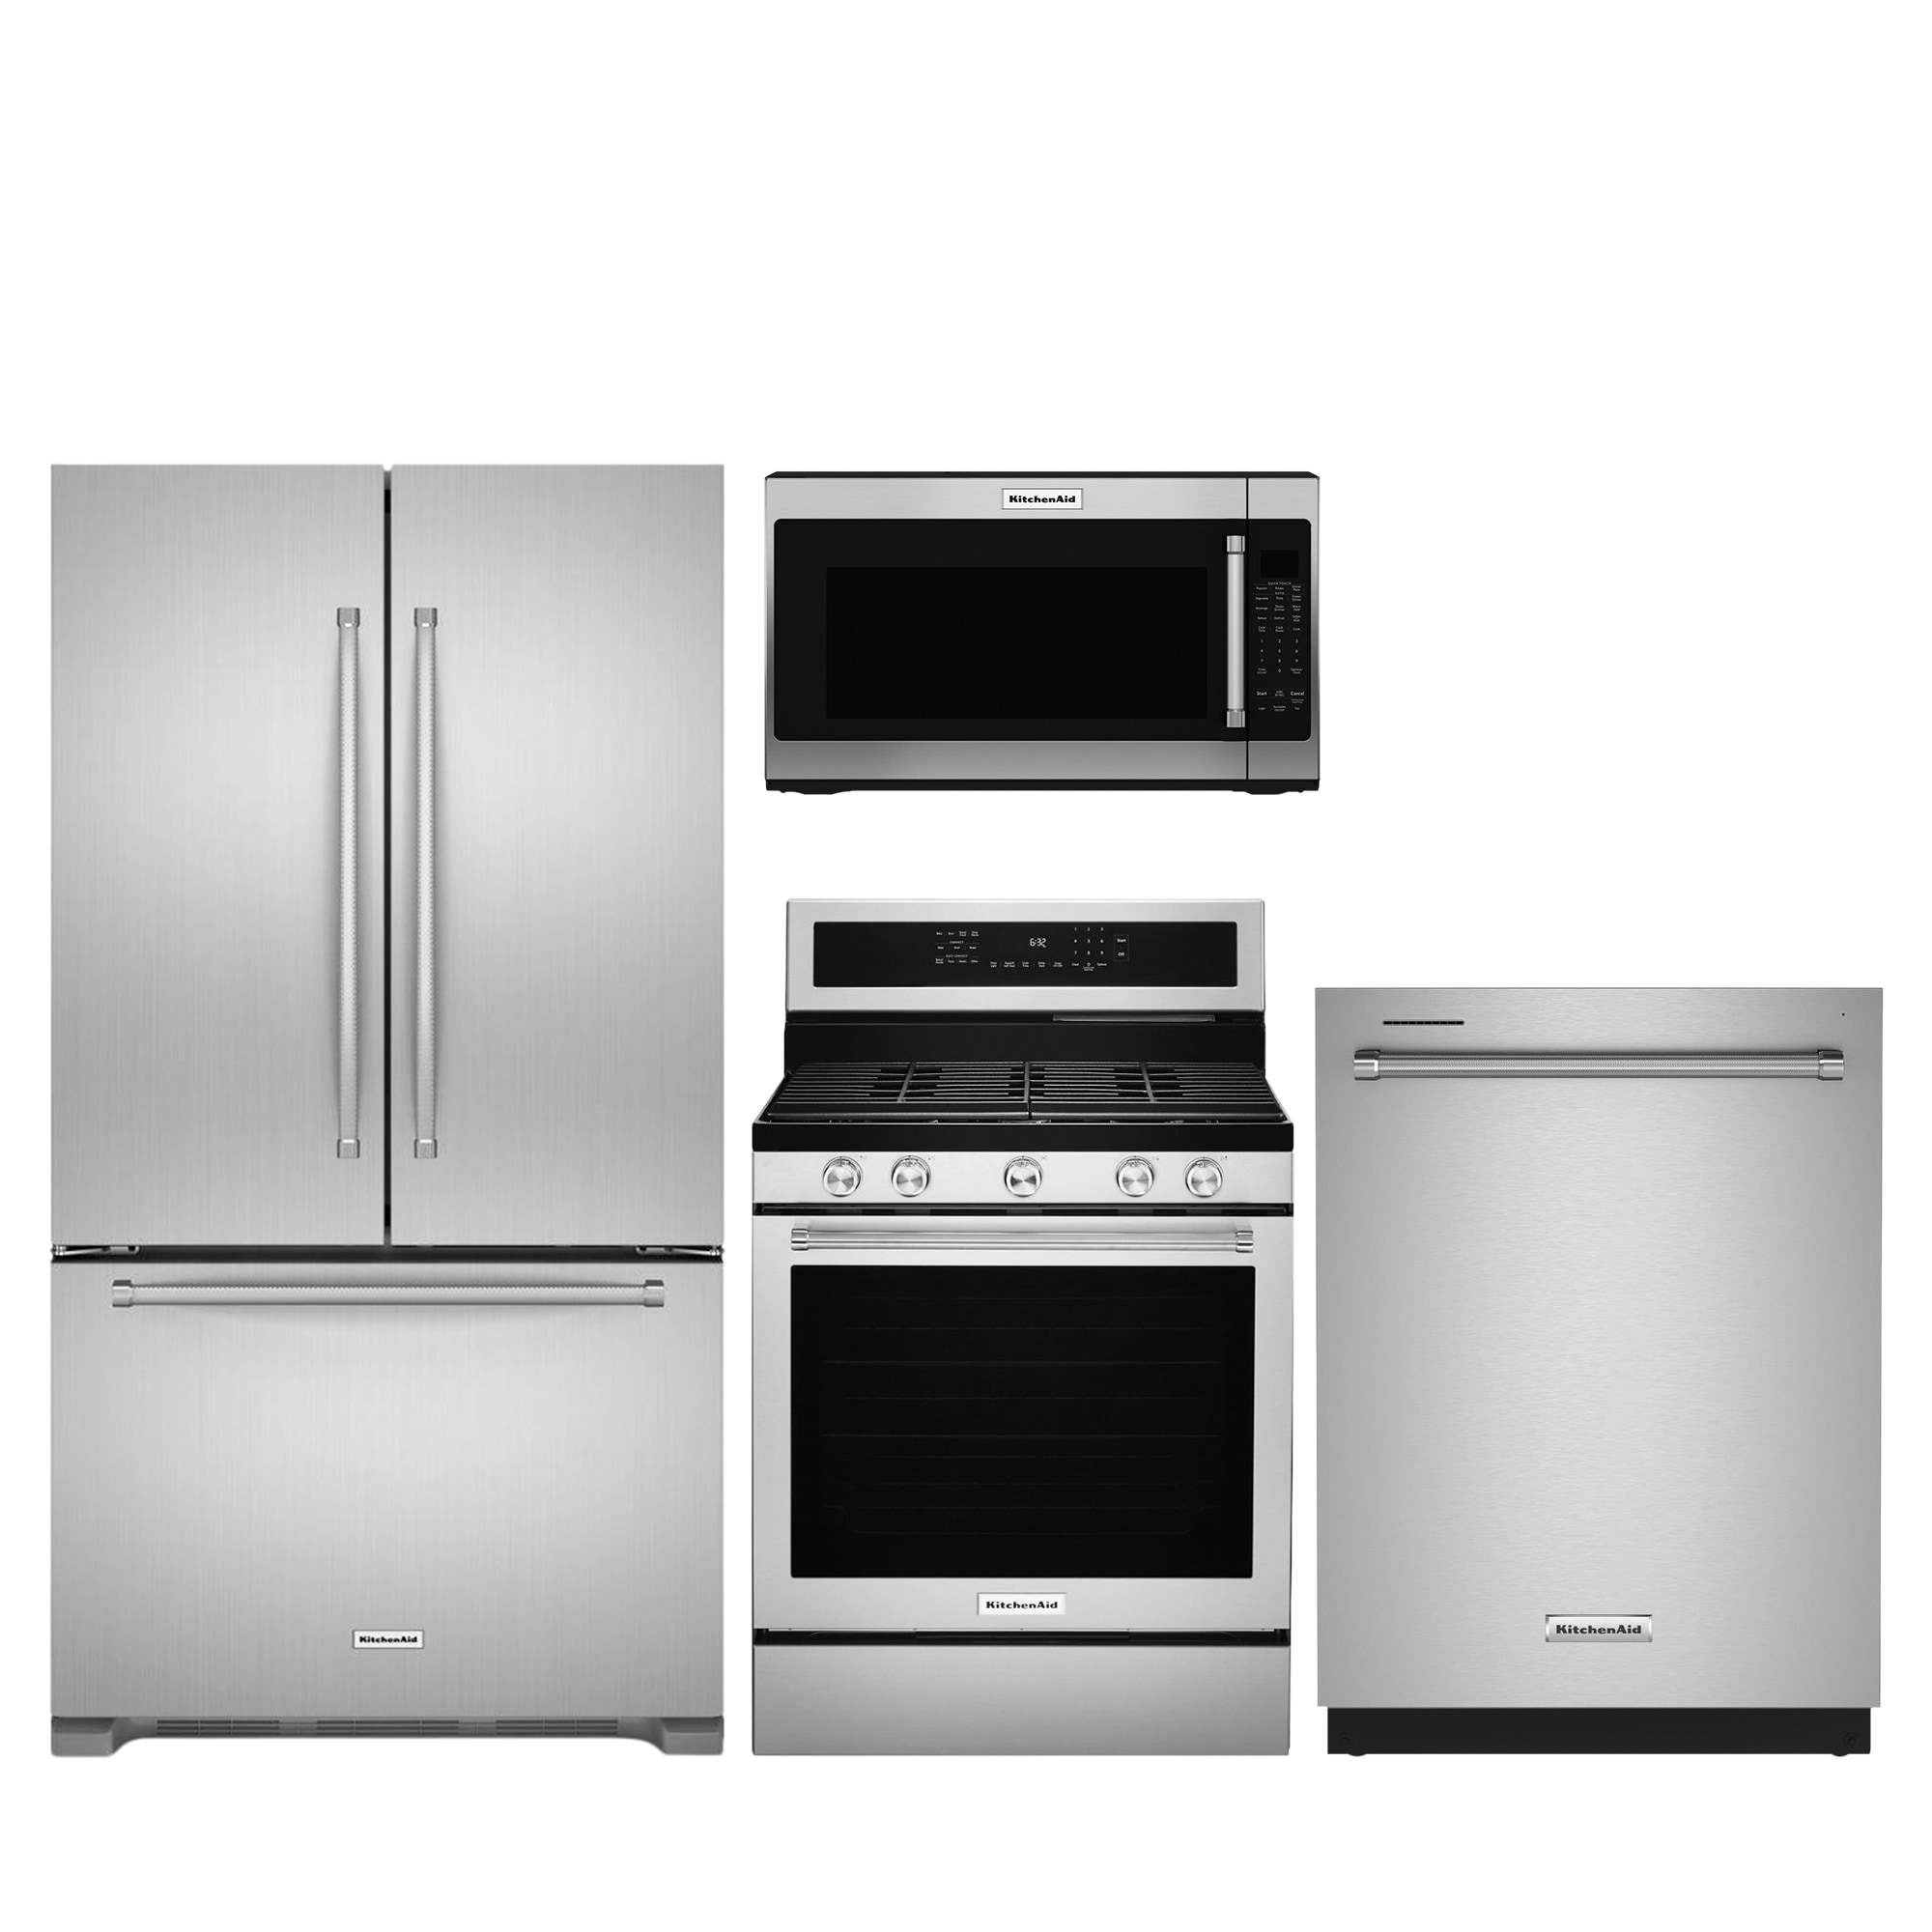 Shop KitchenAid 20-cu ft French Door Refrigerator & Gas Range in Stainless Steel at Lowes.com